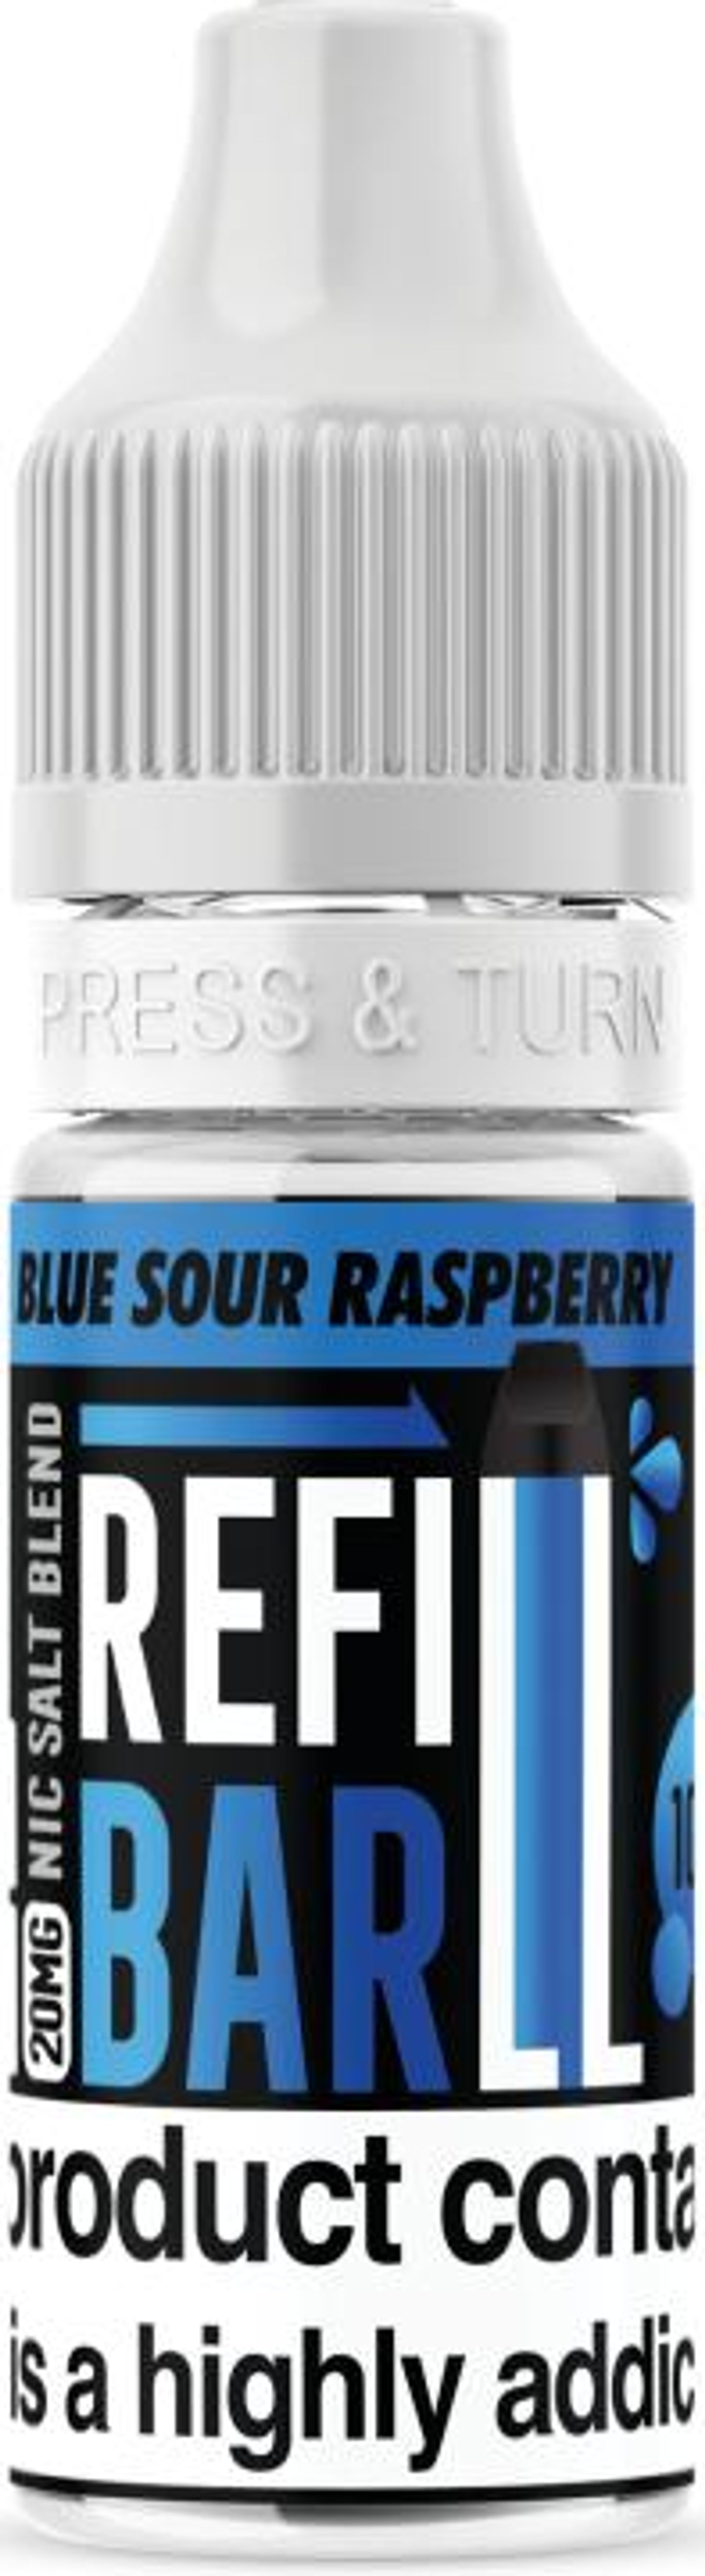 Image of Blue Sour Raspberry by Refill Bar Salts